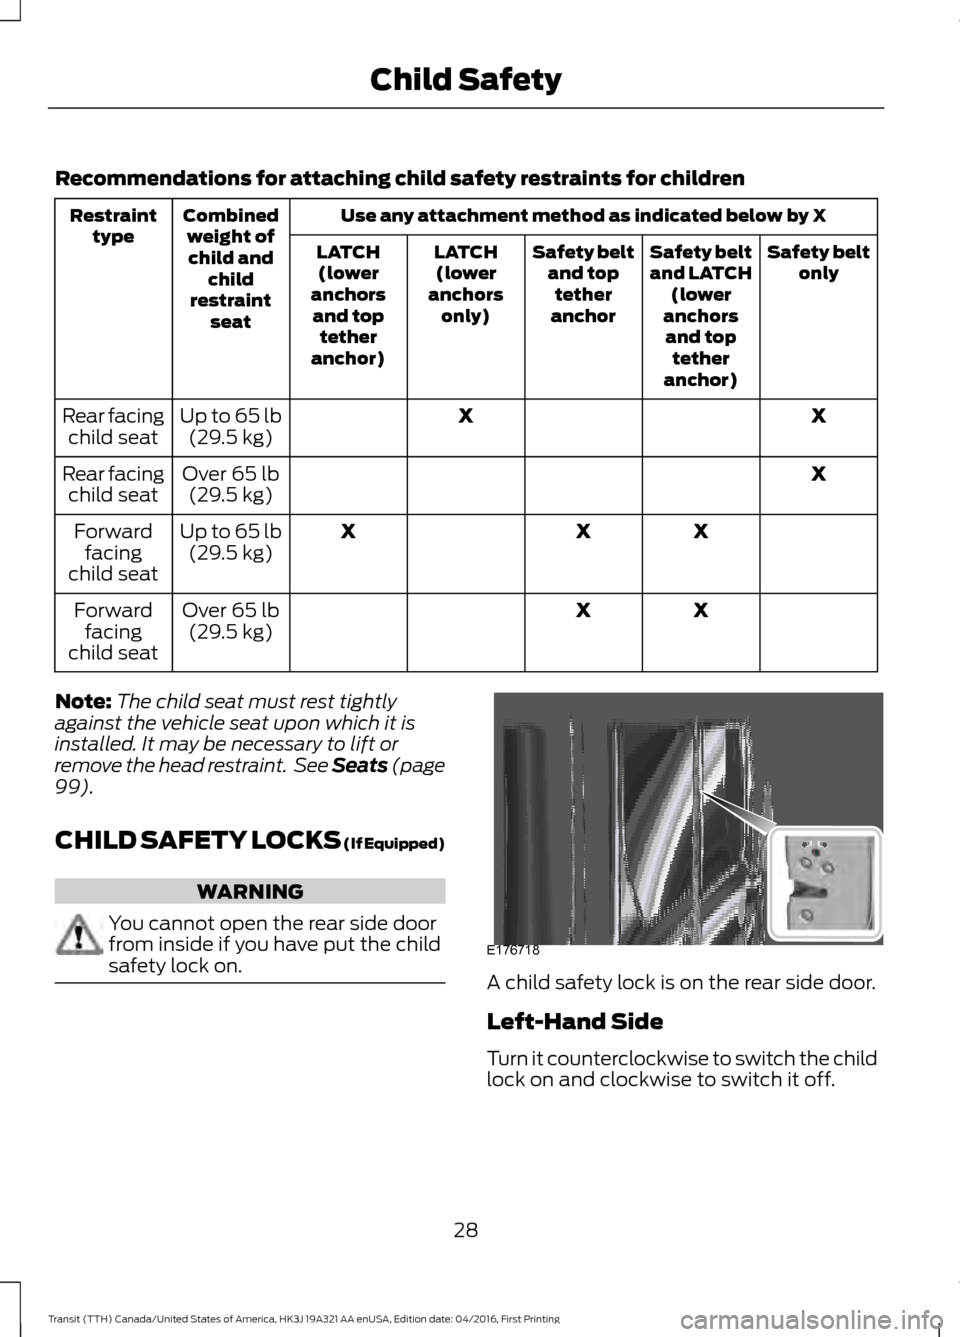 FORD TRANSIT 2017 5.G Owners Manual Recommendations for attaching child safety restraints for children
Use any attachment method as indicated below by X
Combined
weight ofchild and child
restraint seat
Restraint
type Safety belt
only
Sa